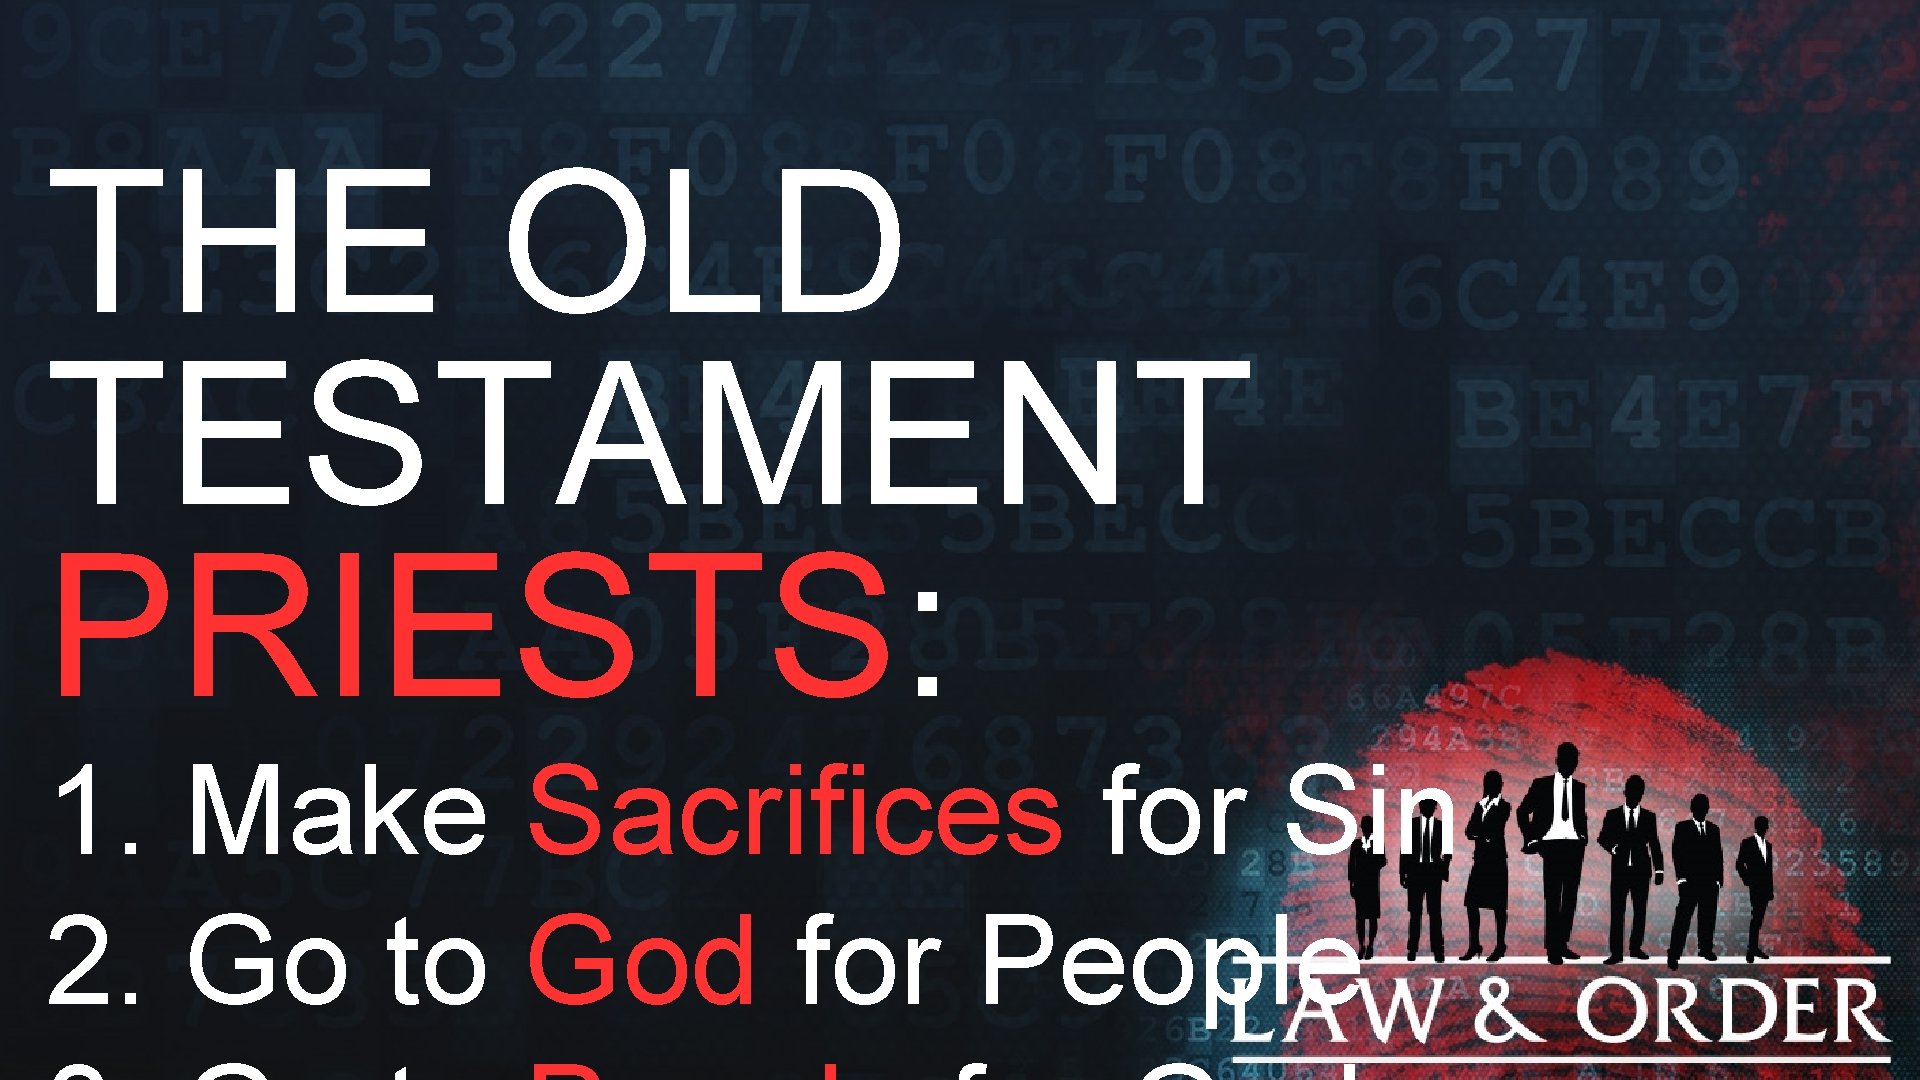 THE OLD TESTAMENT PRIESTS: 1. Make Sacrifices for Sin 2. Go to God for